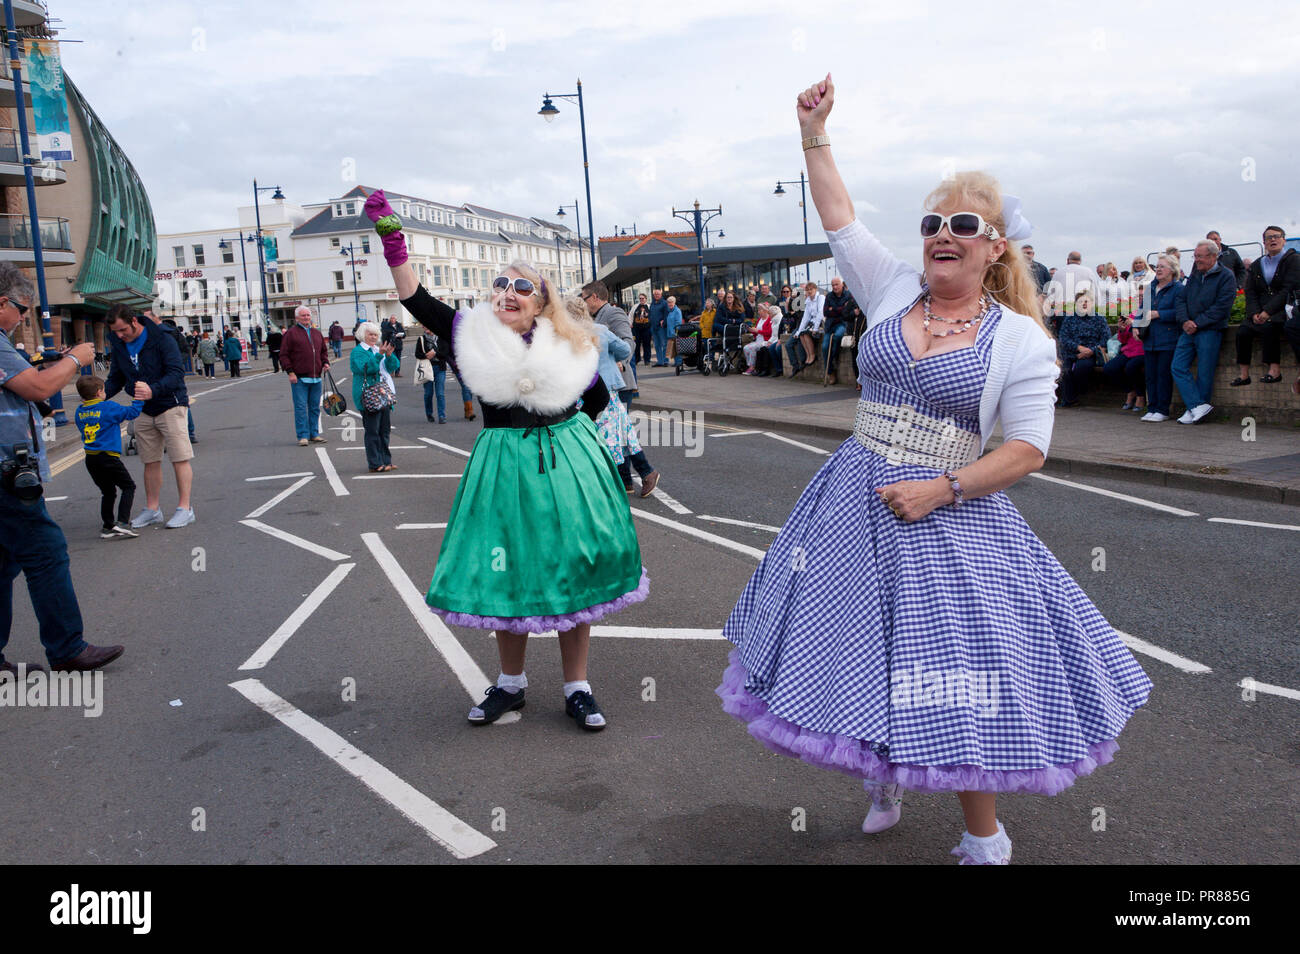 Porthcawl, UK. 30 september 2018. Rozalind Ashley-Williams ( R) and Iris Davie 79 (L) both from Porthcawl take part in thePriscilla Queen of the Prom parade which takes place on the last day of the Elvis Festival. Tens of thousands of Elvis Presley fans descend on the small Welsh seaside town of Porthcawl in South Wales for a three day major celebration of The King and to listen to Elvis tribute artists at the largest festival of it's kind in the world. Credit: Graham M. Lawrence/Alamy Live News Stock Photo